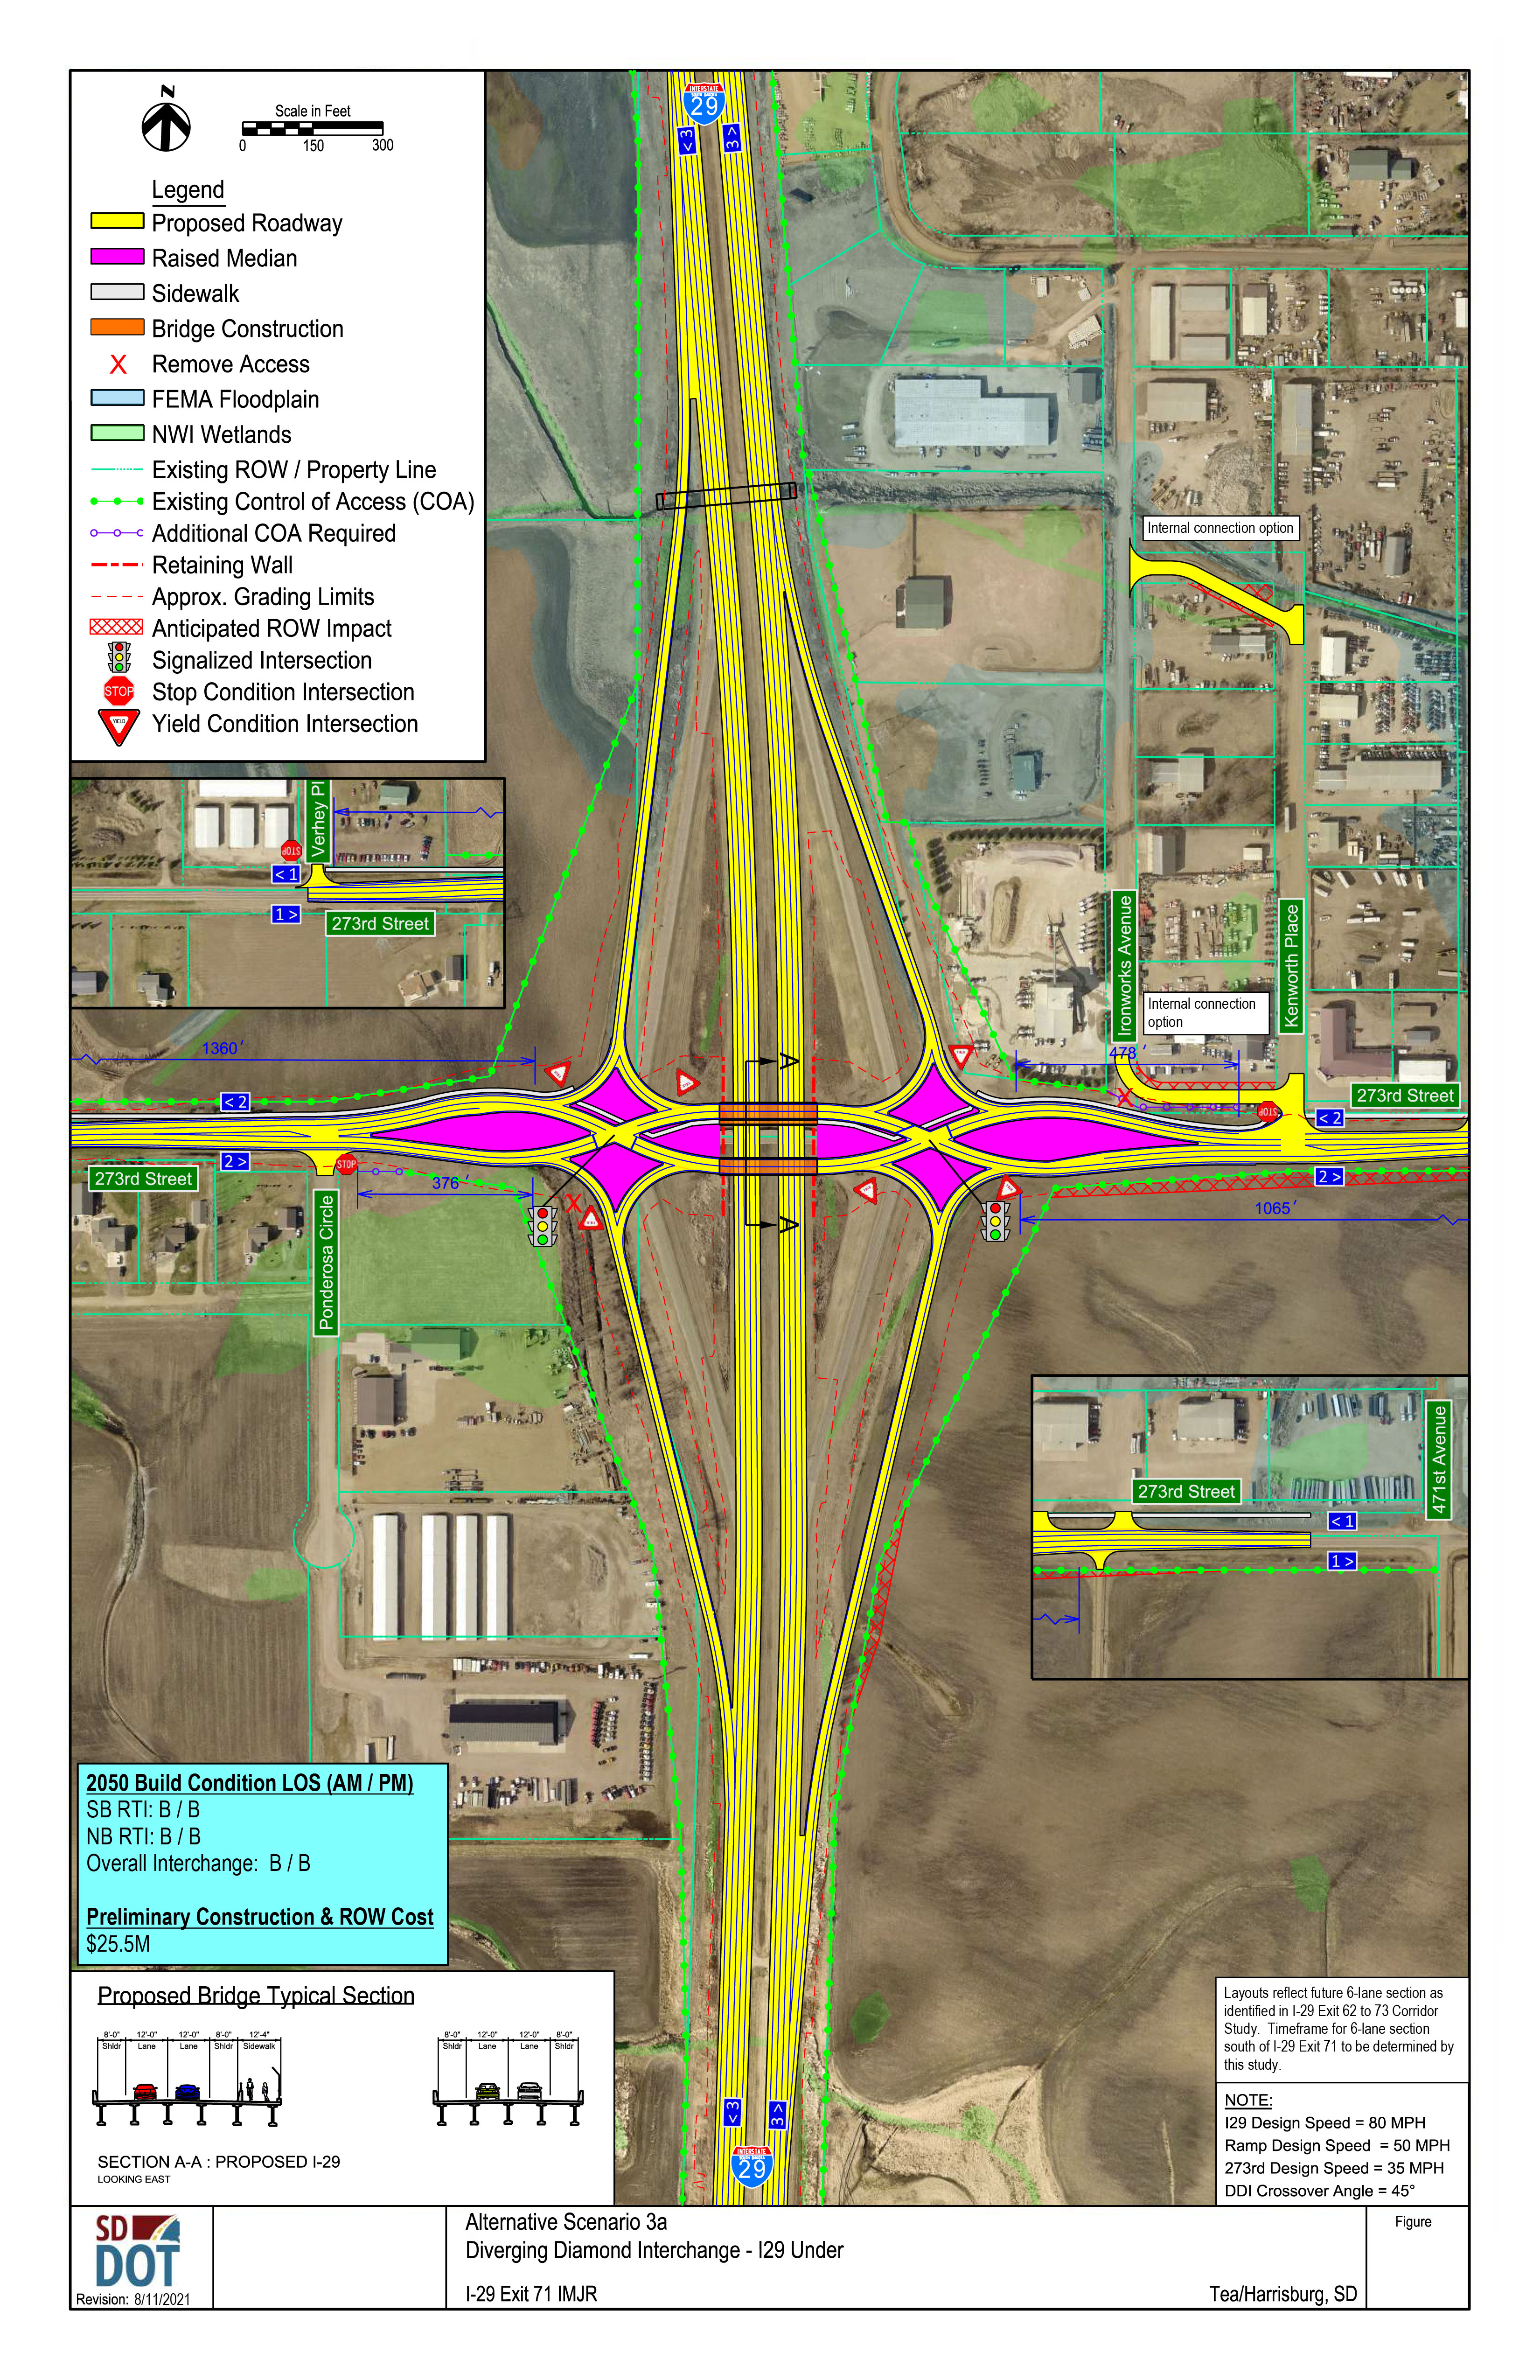 This image shows the conceptual layout of a Diverging Diamond Interchange, and what the road under it would look like. Details on the diagram include proposed roadway, raised median, sidewalk, bridge construction, access control, FEMA floodplain, NWI wetlands, existing Right of Ways and property lines, existing control of access points, additional control of access points needed, retaining walls, grading limits, anticipated right of way impacts, signalized intersections, stop condition intersections and yield condition intersections.